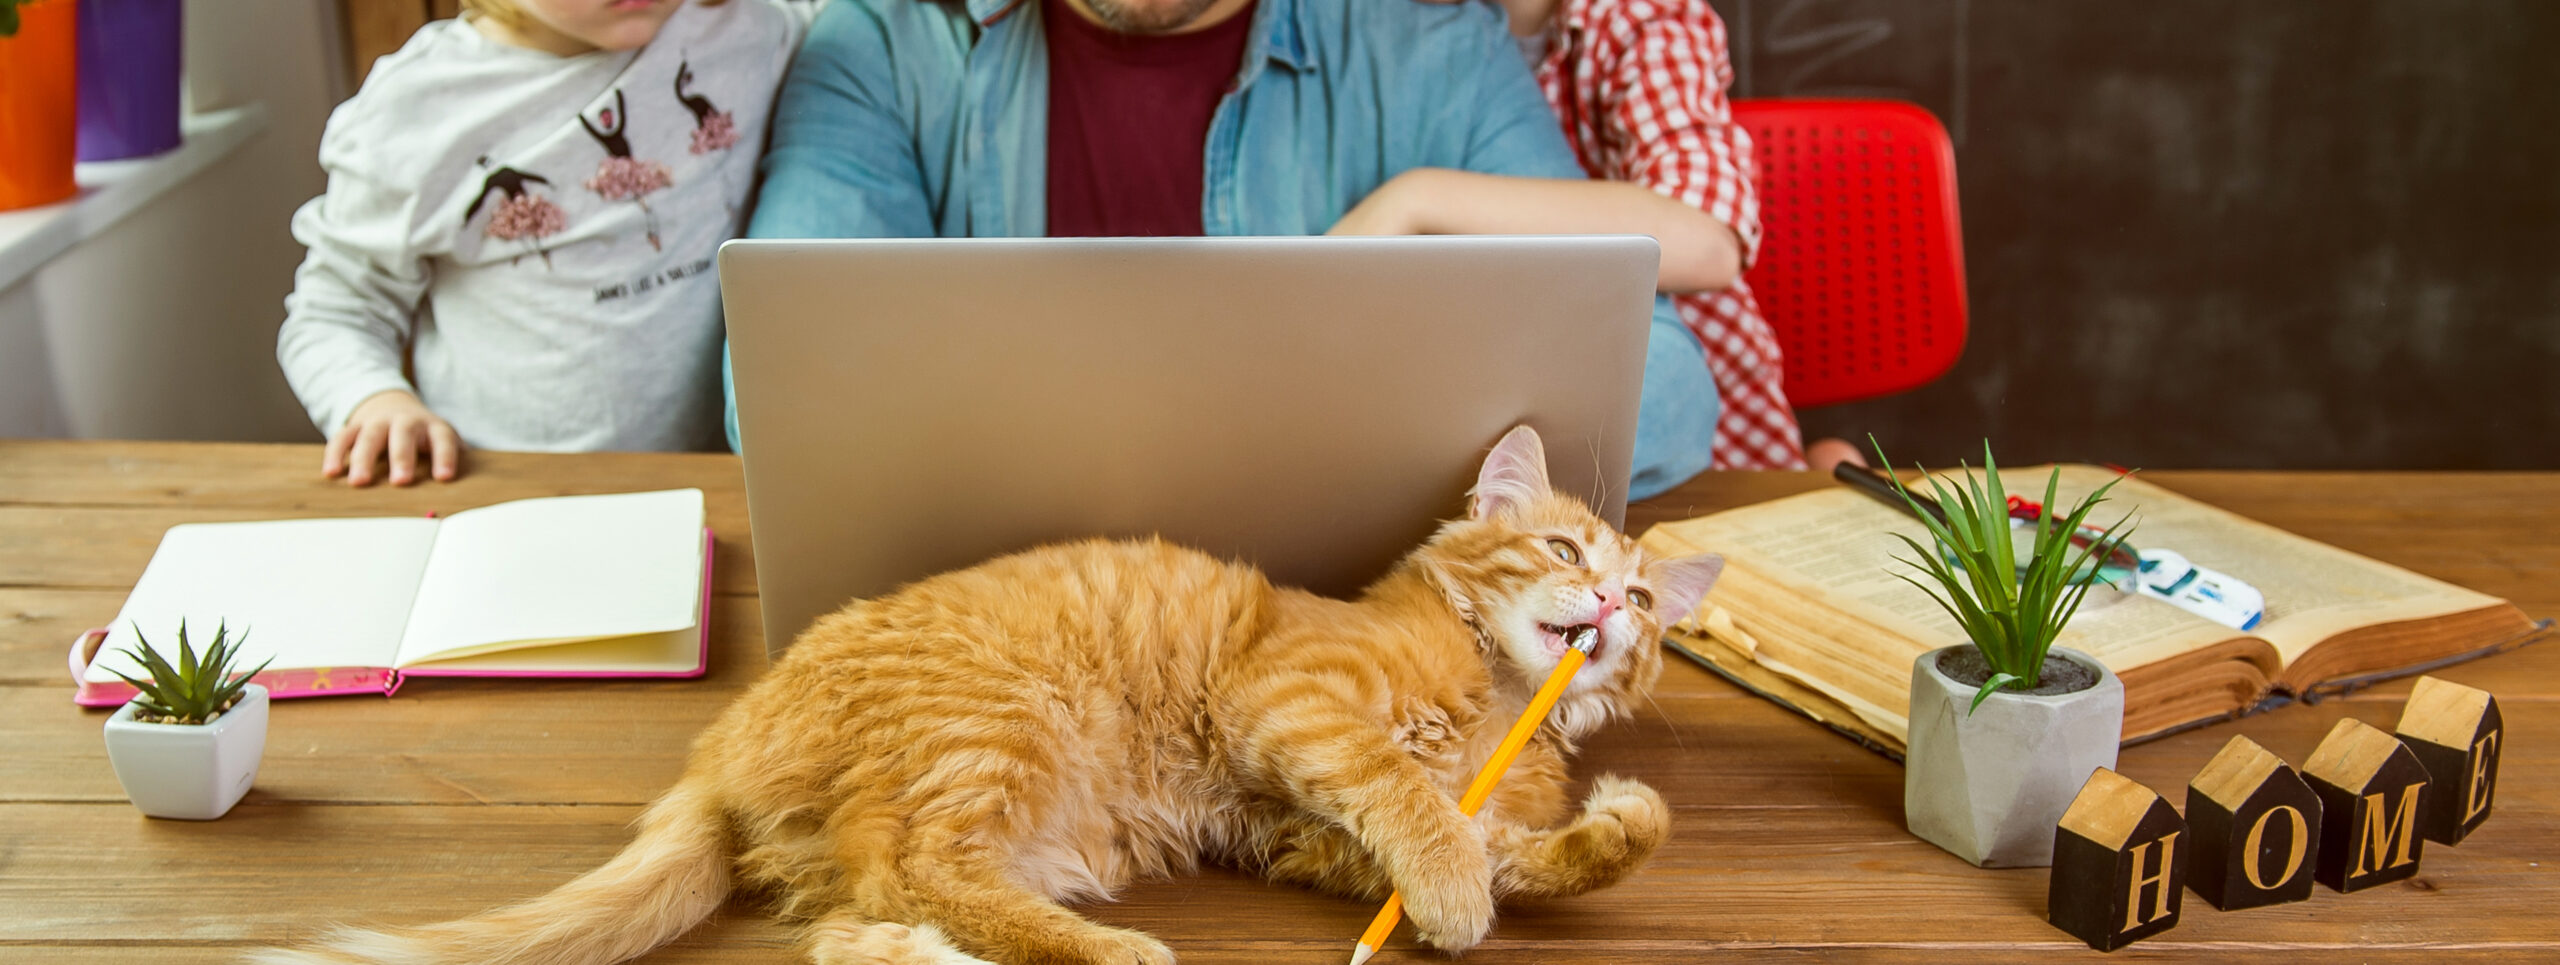 photo of a father working on a computer with a toddler next to him. A cat is laying in front of the computer playing with a pencil. Photo is to illustrate remote work.